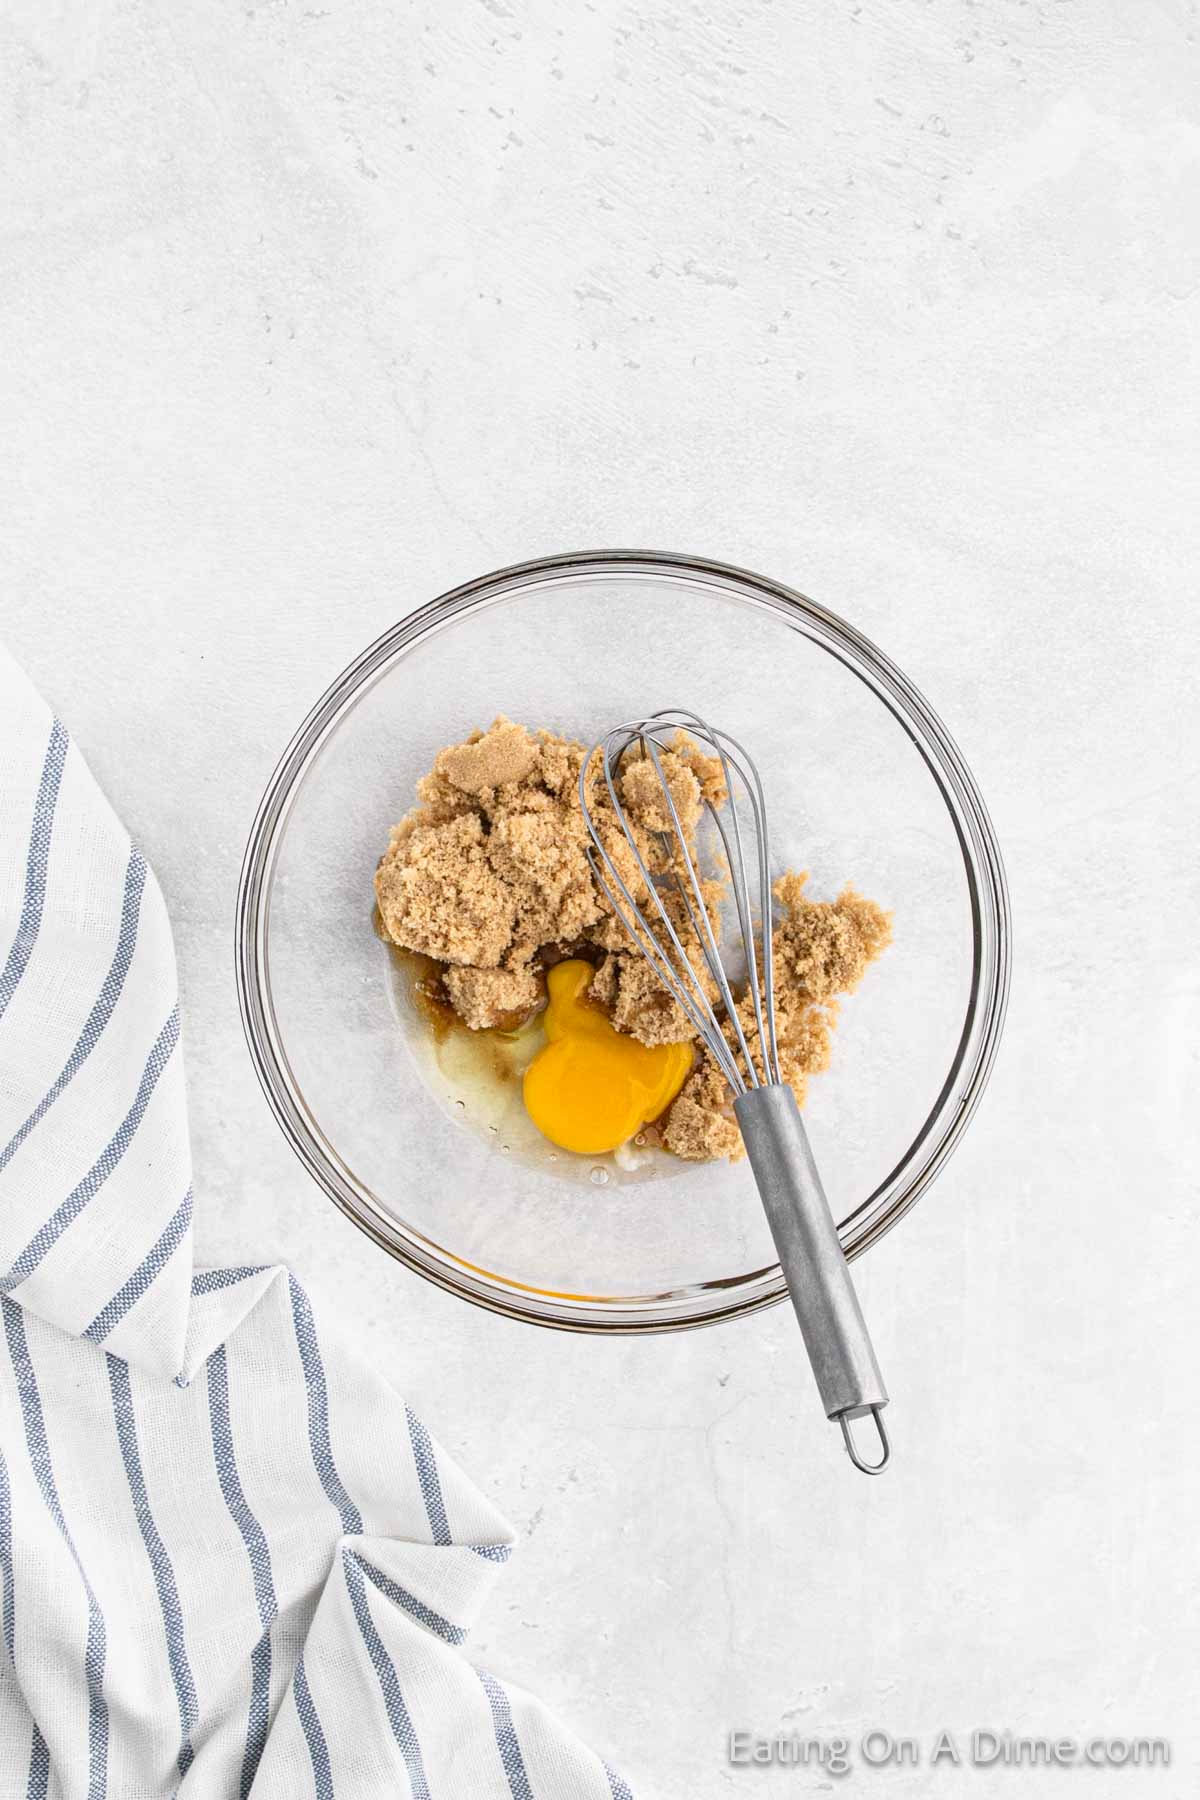 Whisk together eggs and brown sugar together in a bowl